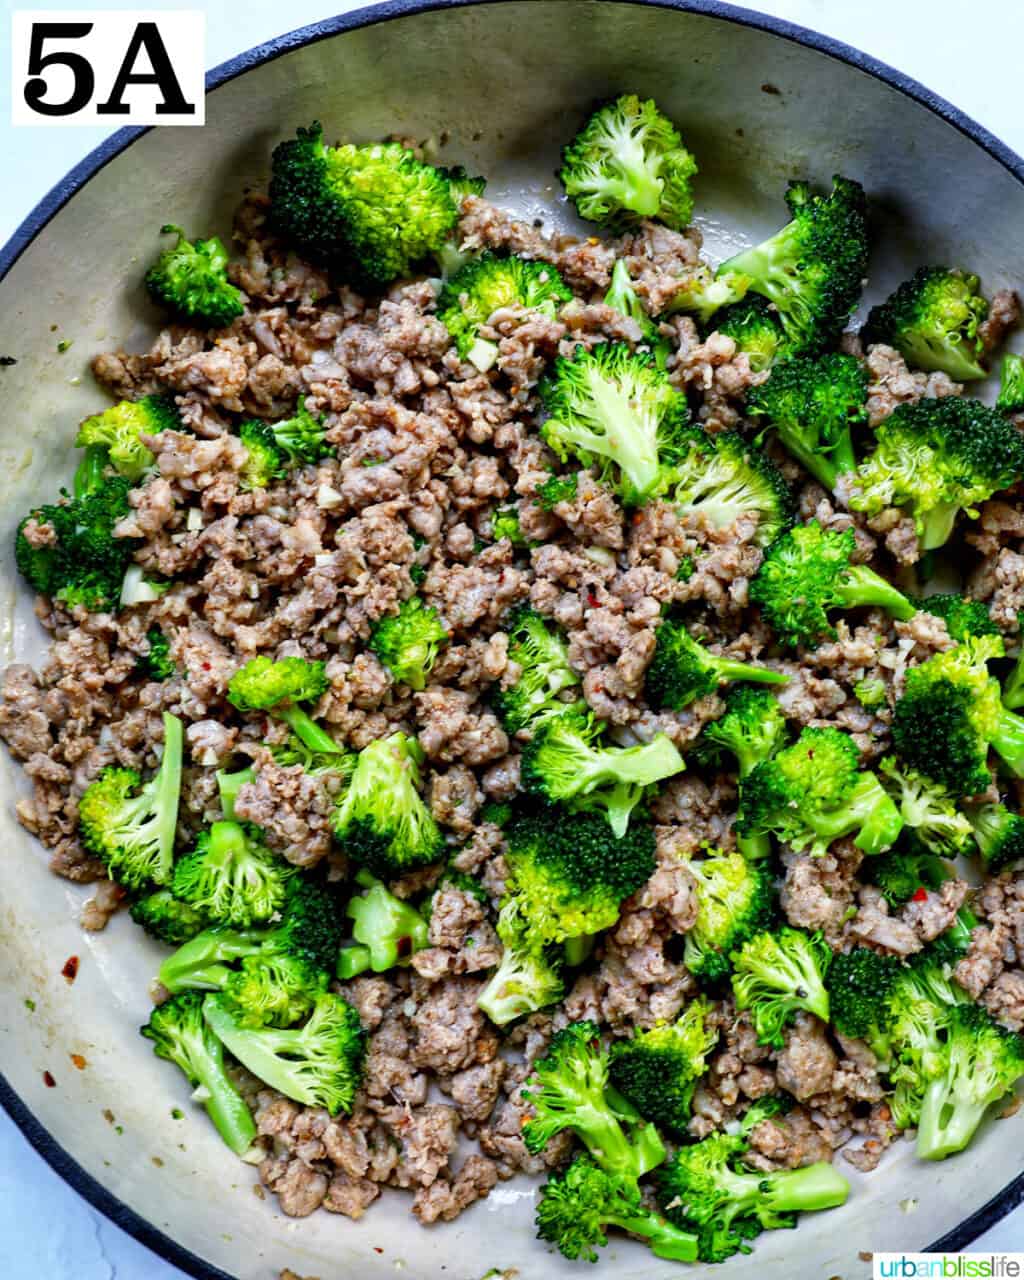 chopped broccoli and Italian sausage cooking in a large skillet.